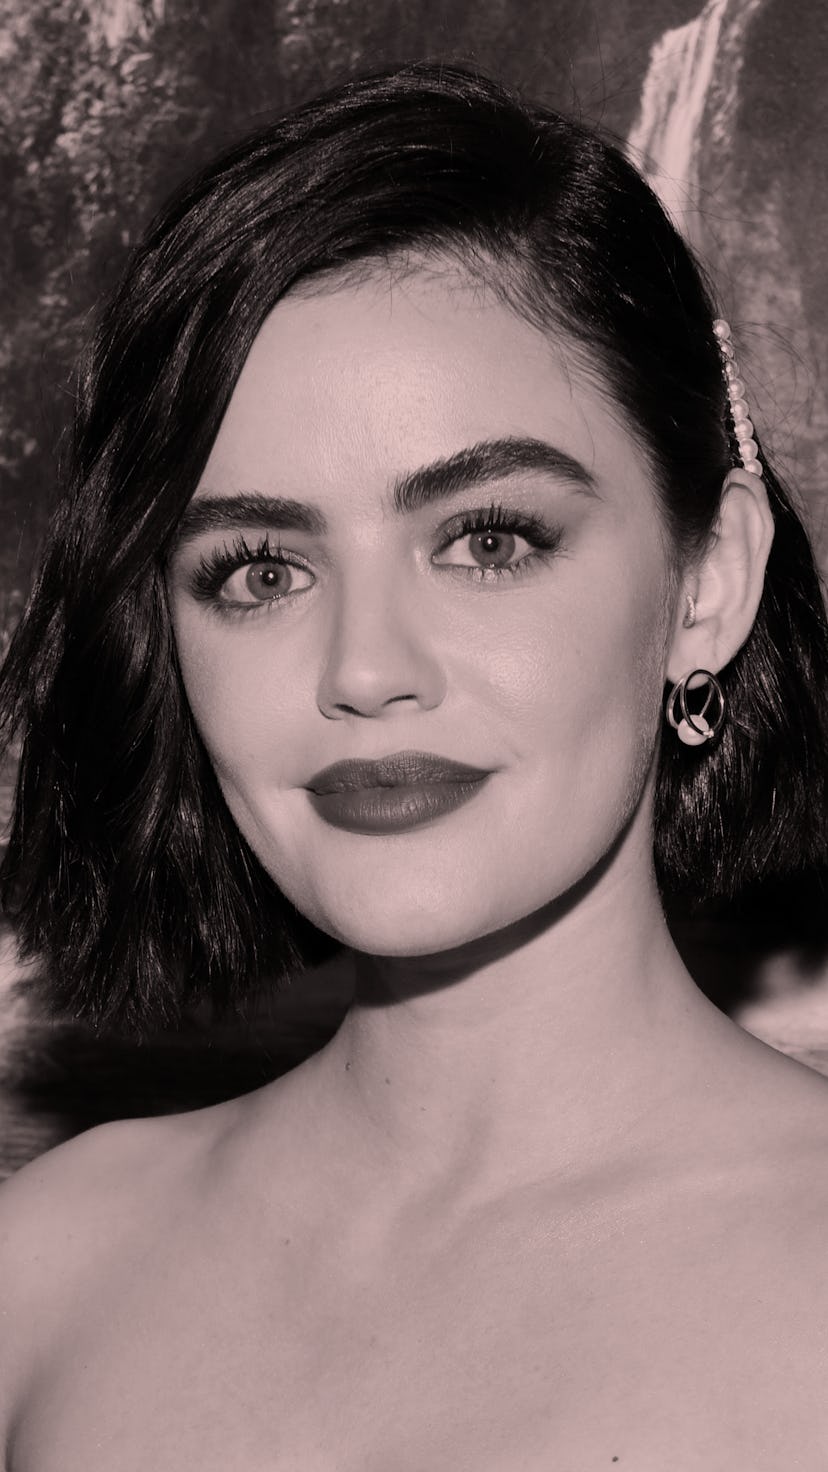 Lucy Hale, wearing pink lipstick, stands against backdrop of fake waterfall